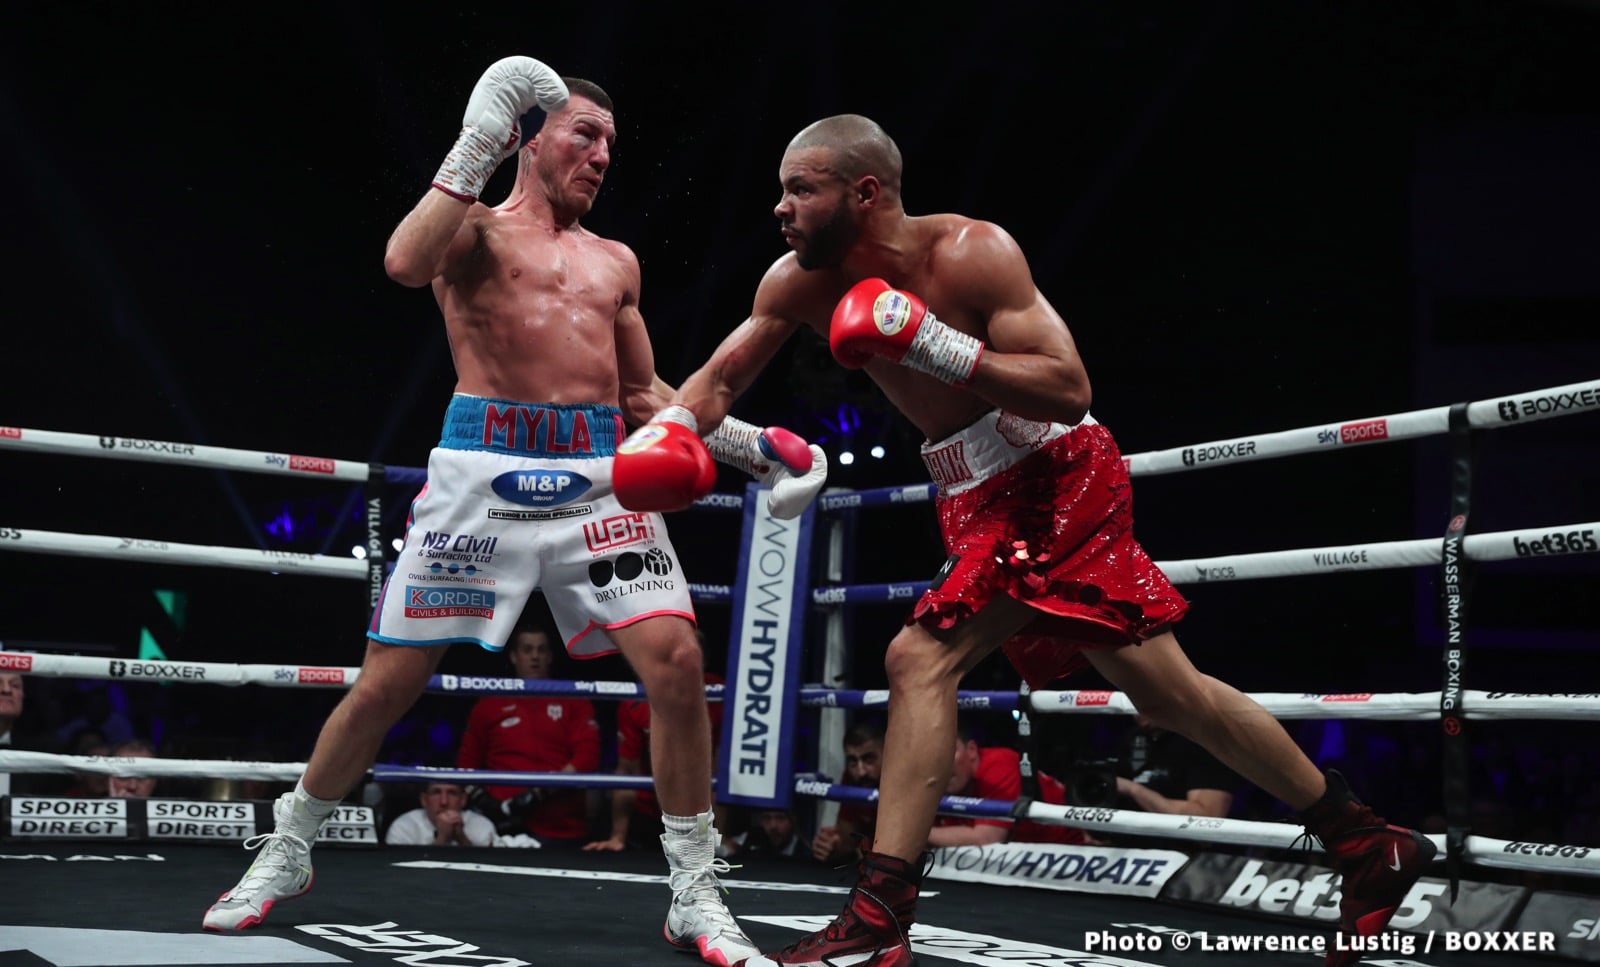 Image: Liam Williams in hot water with BBBofC, for 'Kill' comment about Eubank Jr